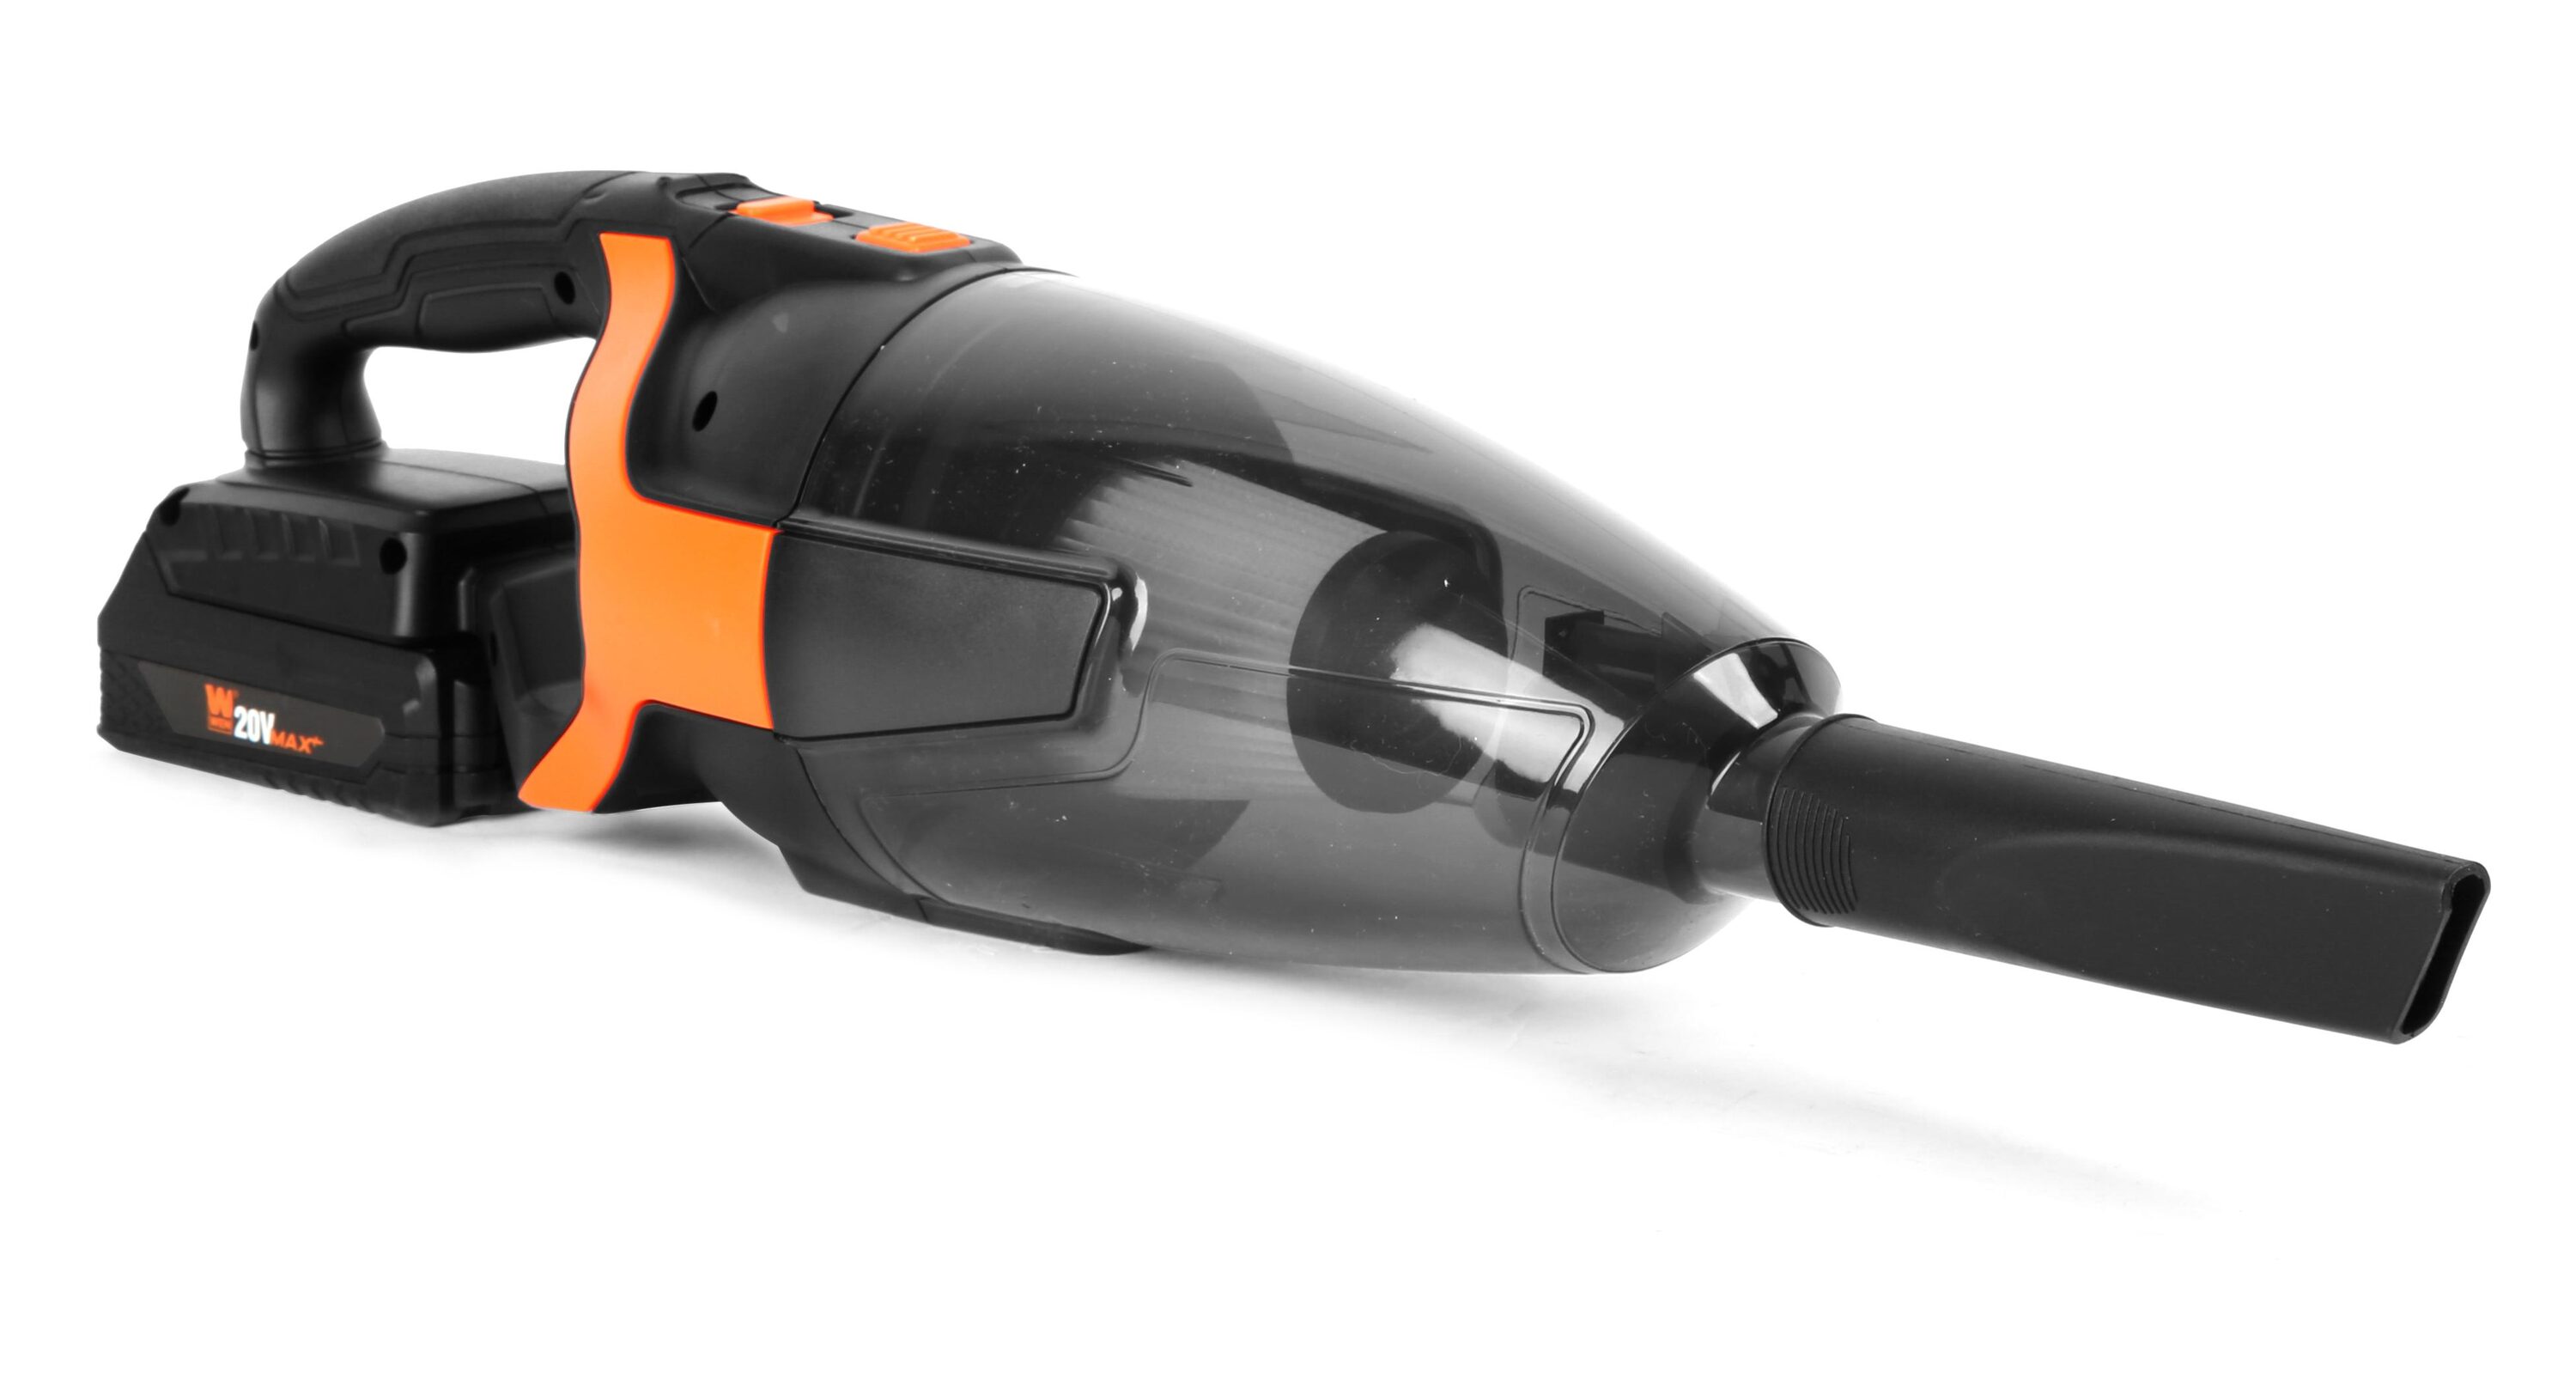 WEN 20V Max Cordless Handheld Vacuum Cleaner Kit with 2.0 Ah Lithium-Ion  Battery and Charger, Black